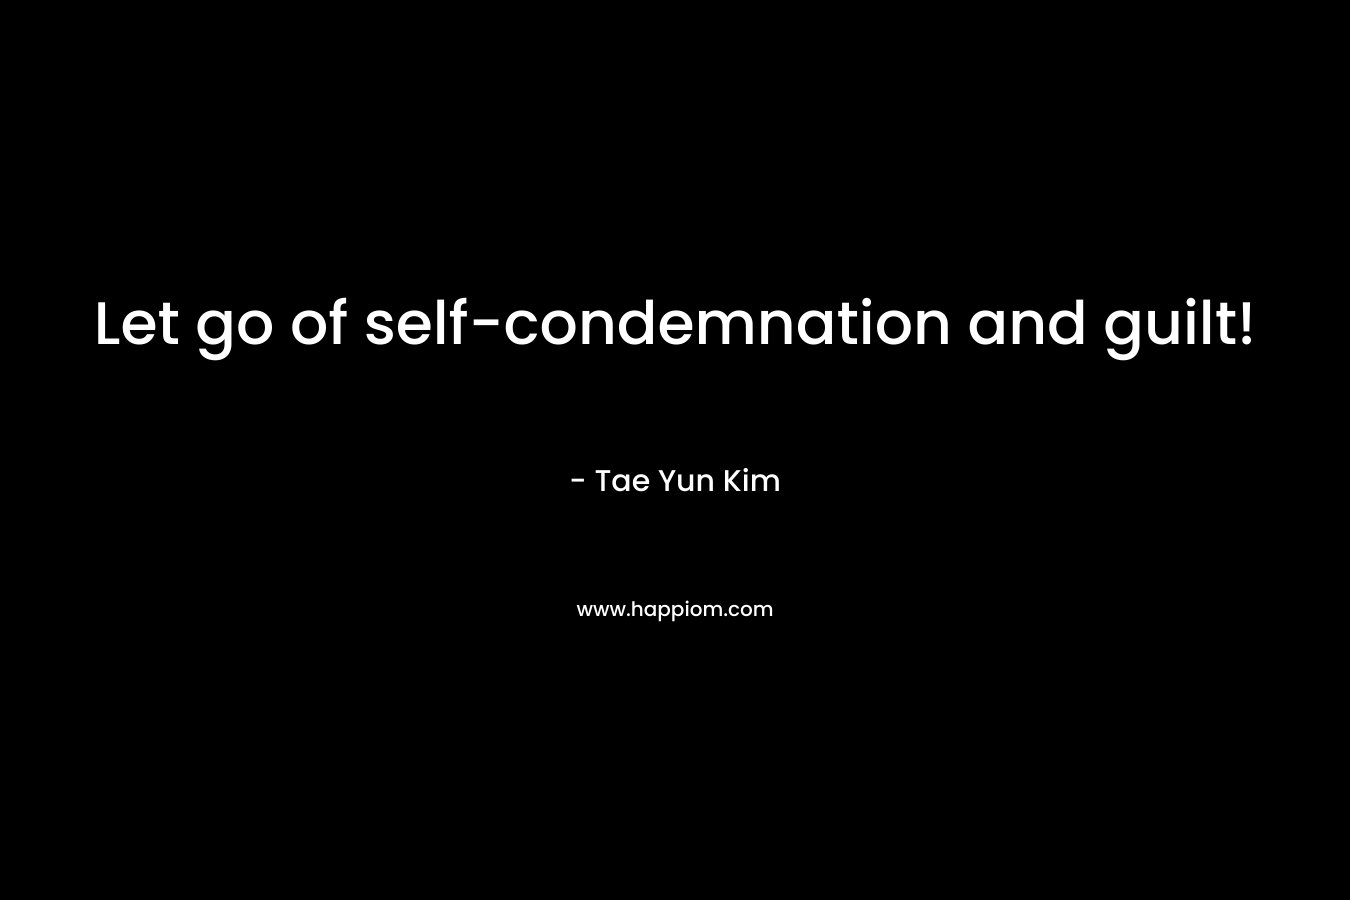 Let go of self-condemnation and guilt! – Tae Yun Kim